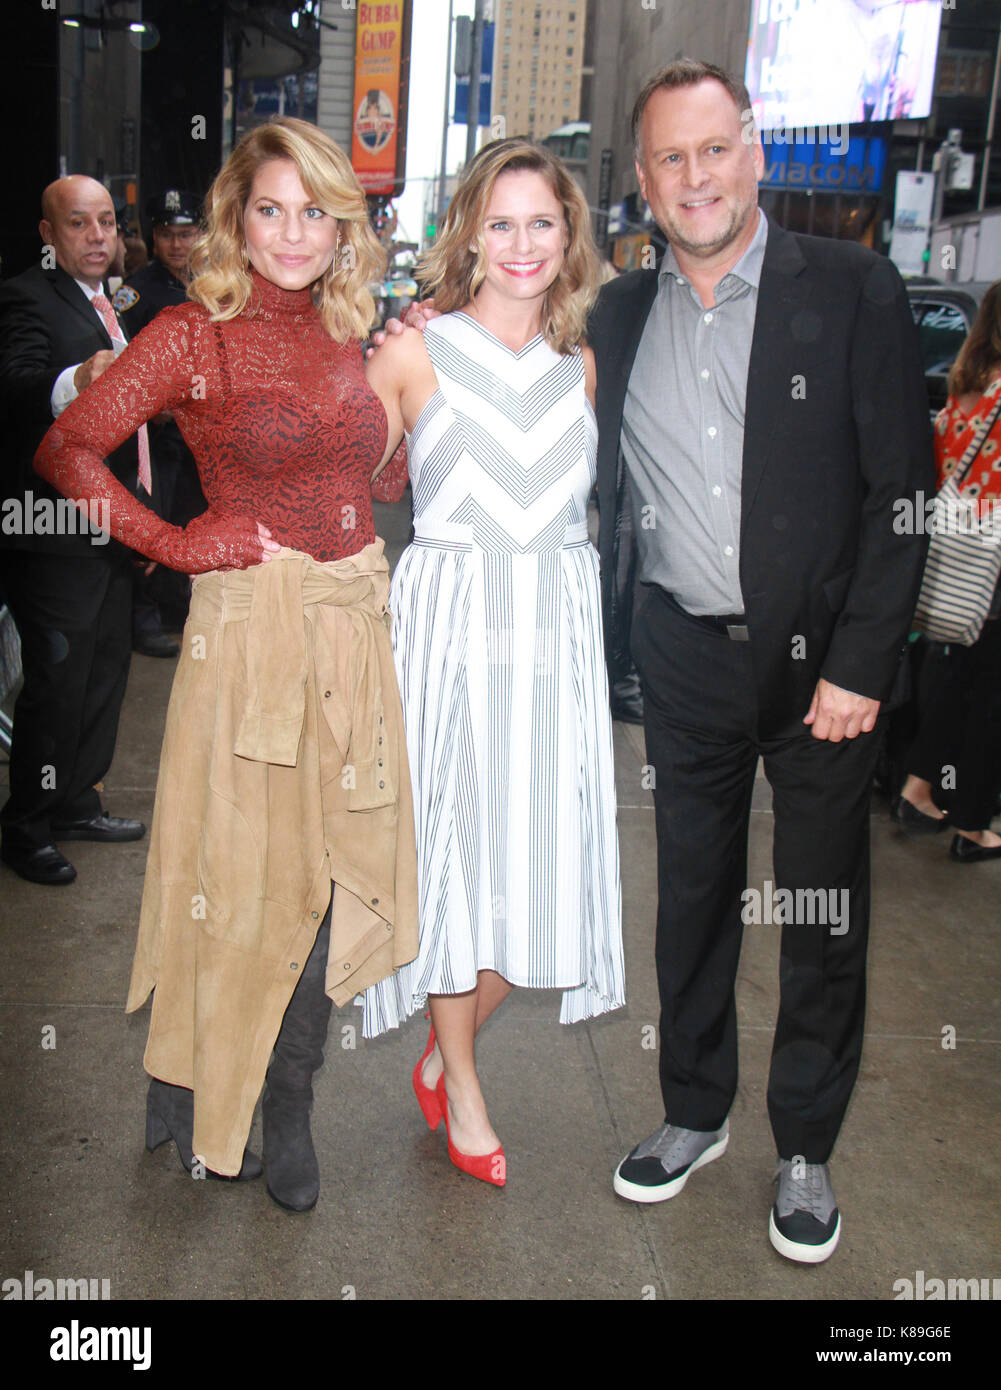 New York, NY, USA. 18th Sep, 2017. Candace Cameron Bure, Andrea Barber, Dave Coulier at Good Morning America promoting the new season of Fuller House in New York September 18, 2017. Credit: Rw/Media Punch/Alamy Live News Stock Photo